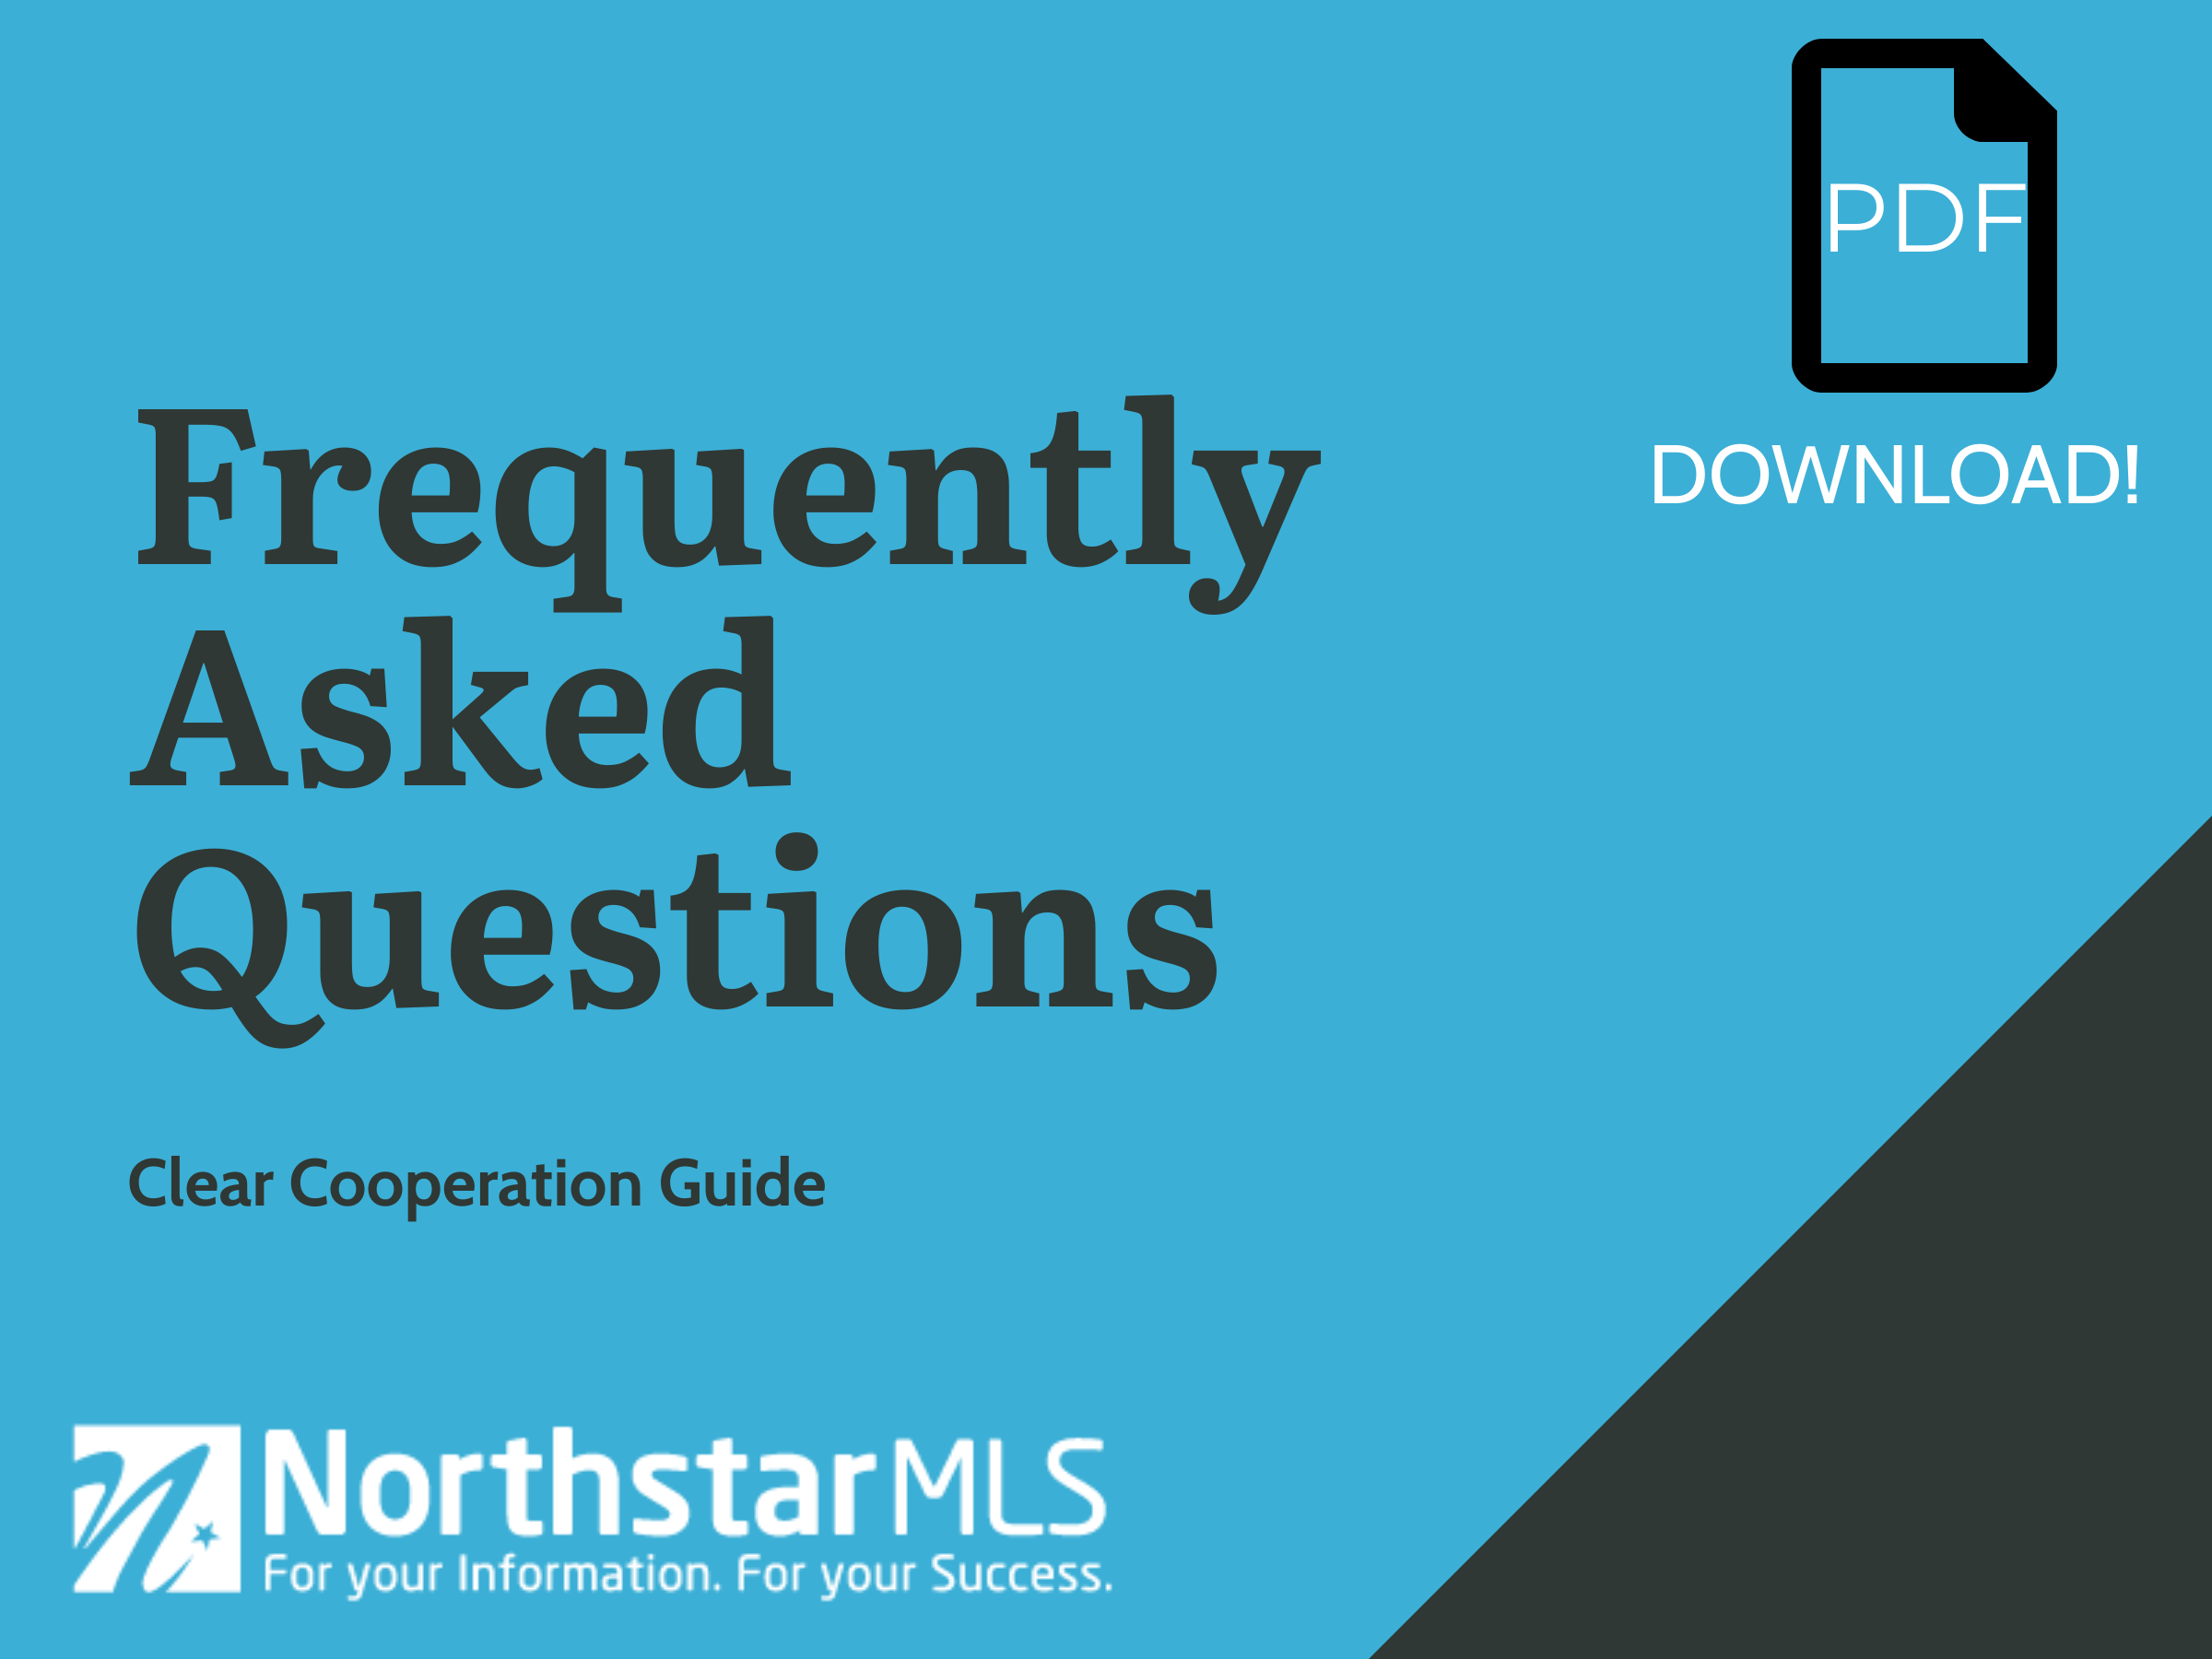 Click the image above to download the northstarmls clear cooperation Faq guide